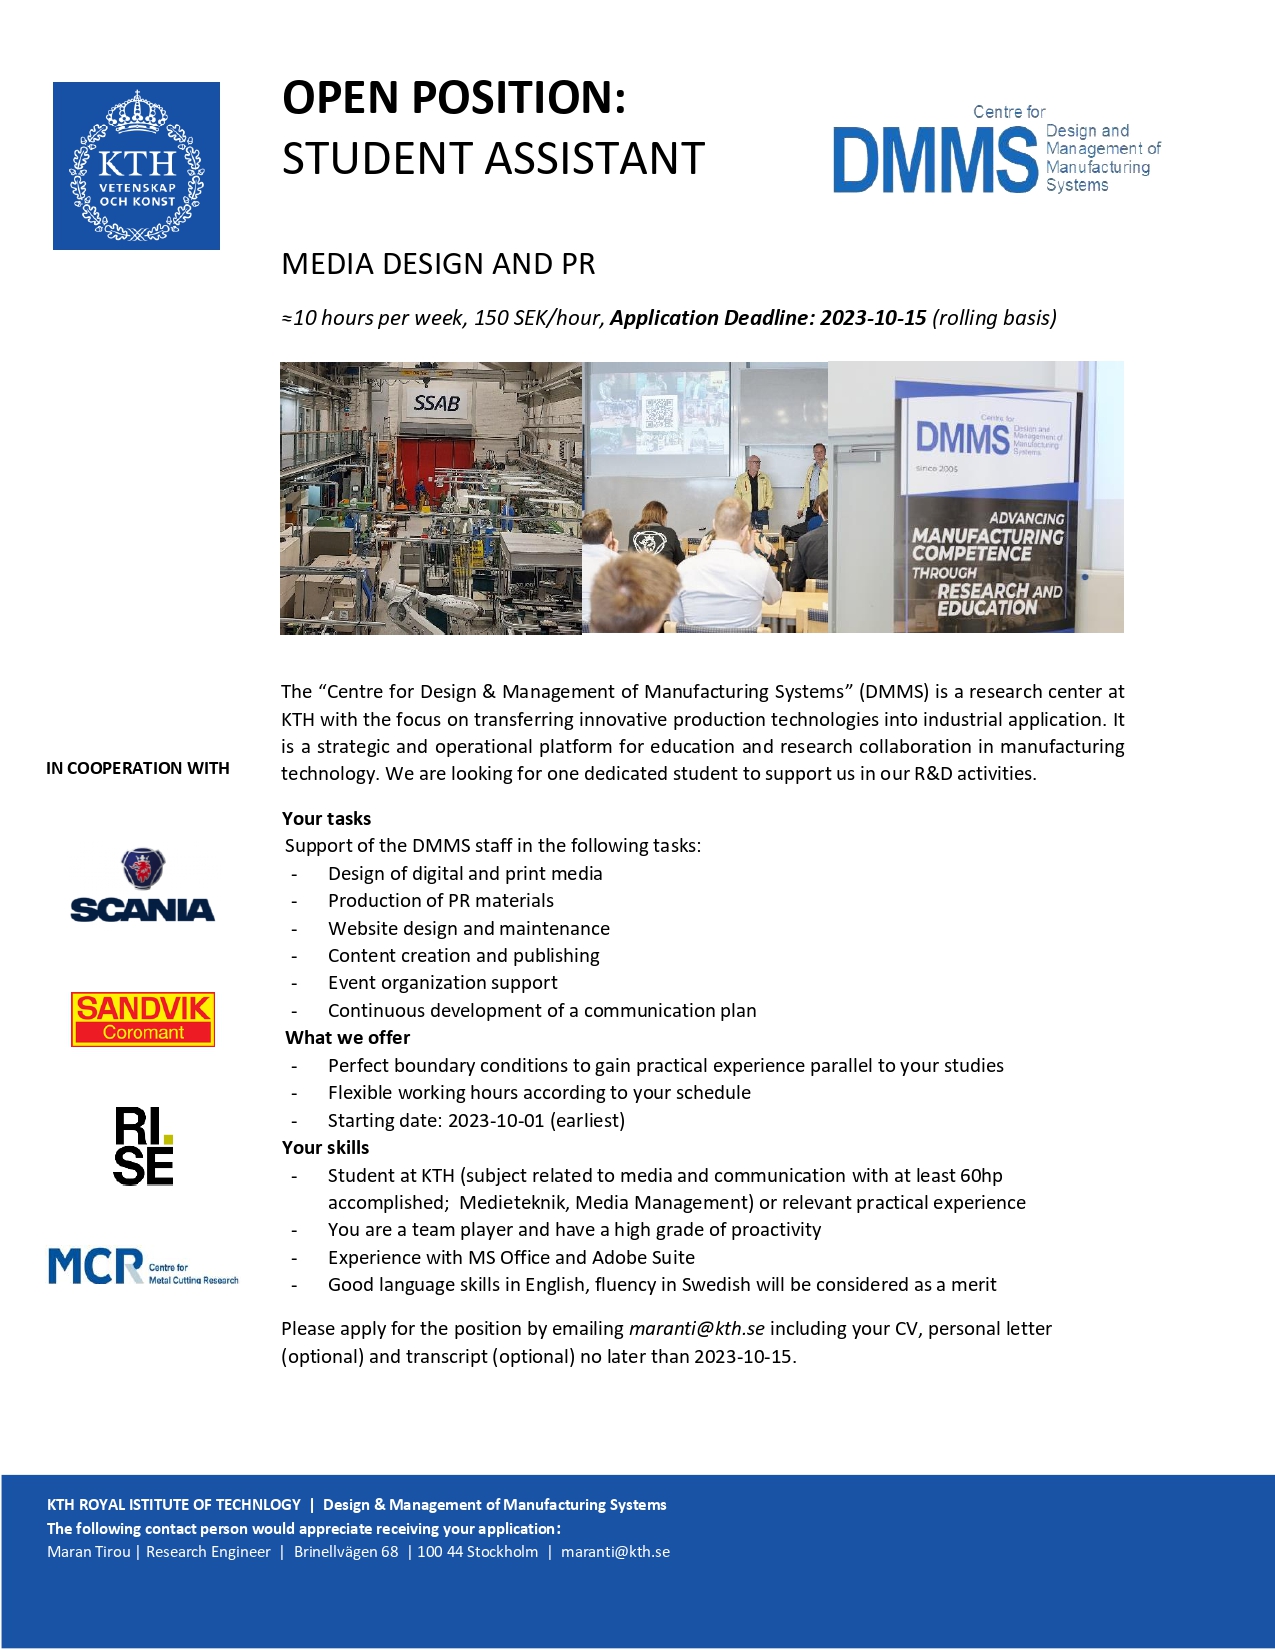 The job poster for the Media Design open position